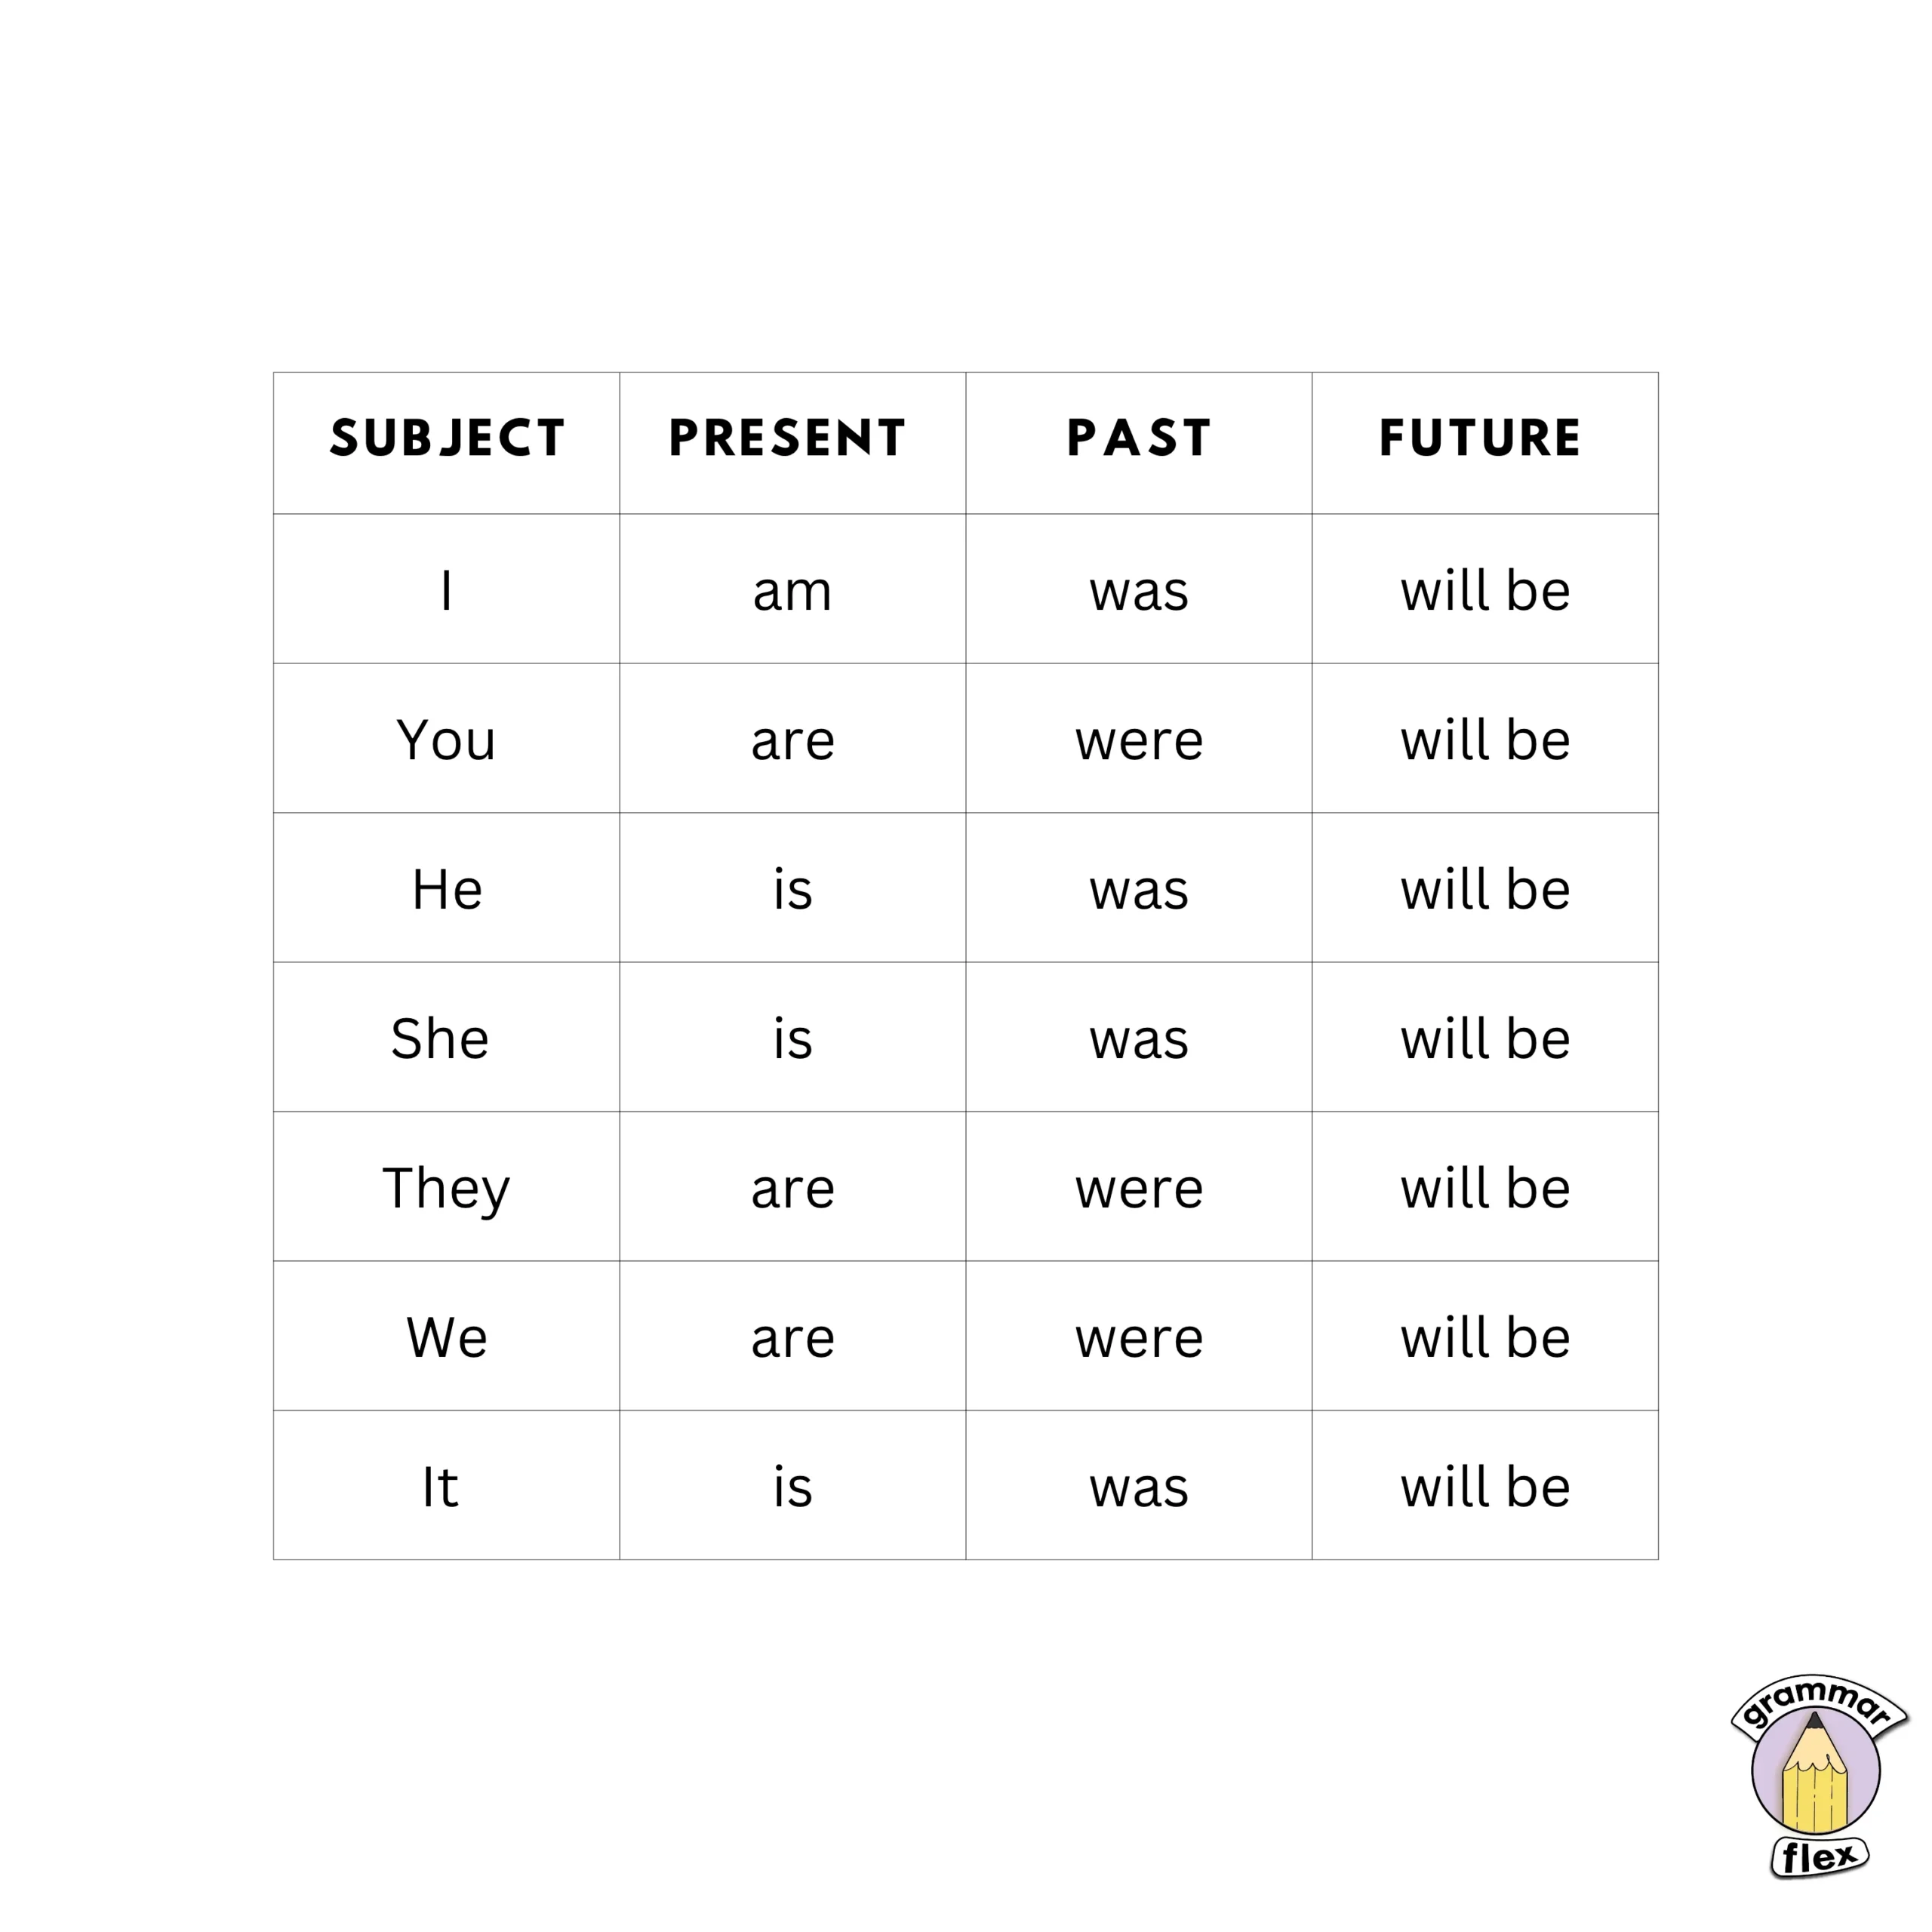 To be verb forms. Made by Gflex on Canva.